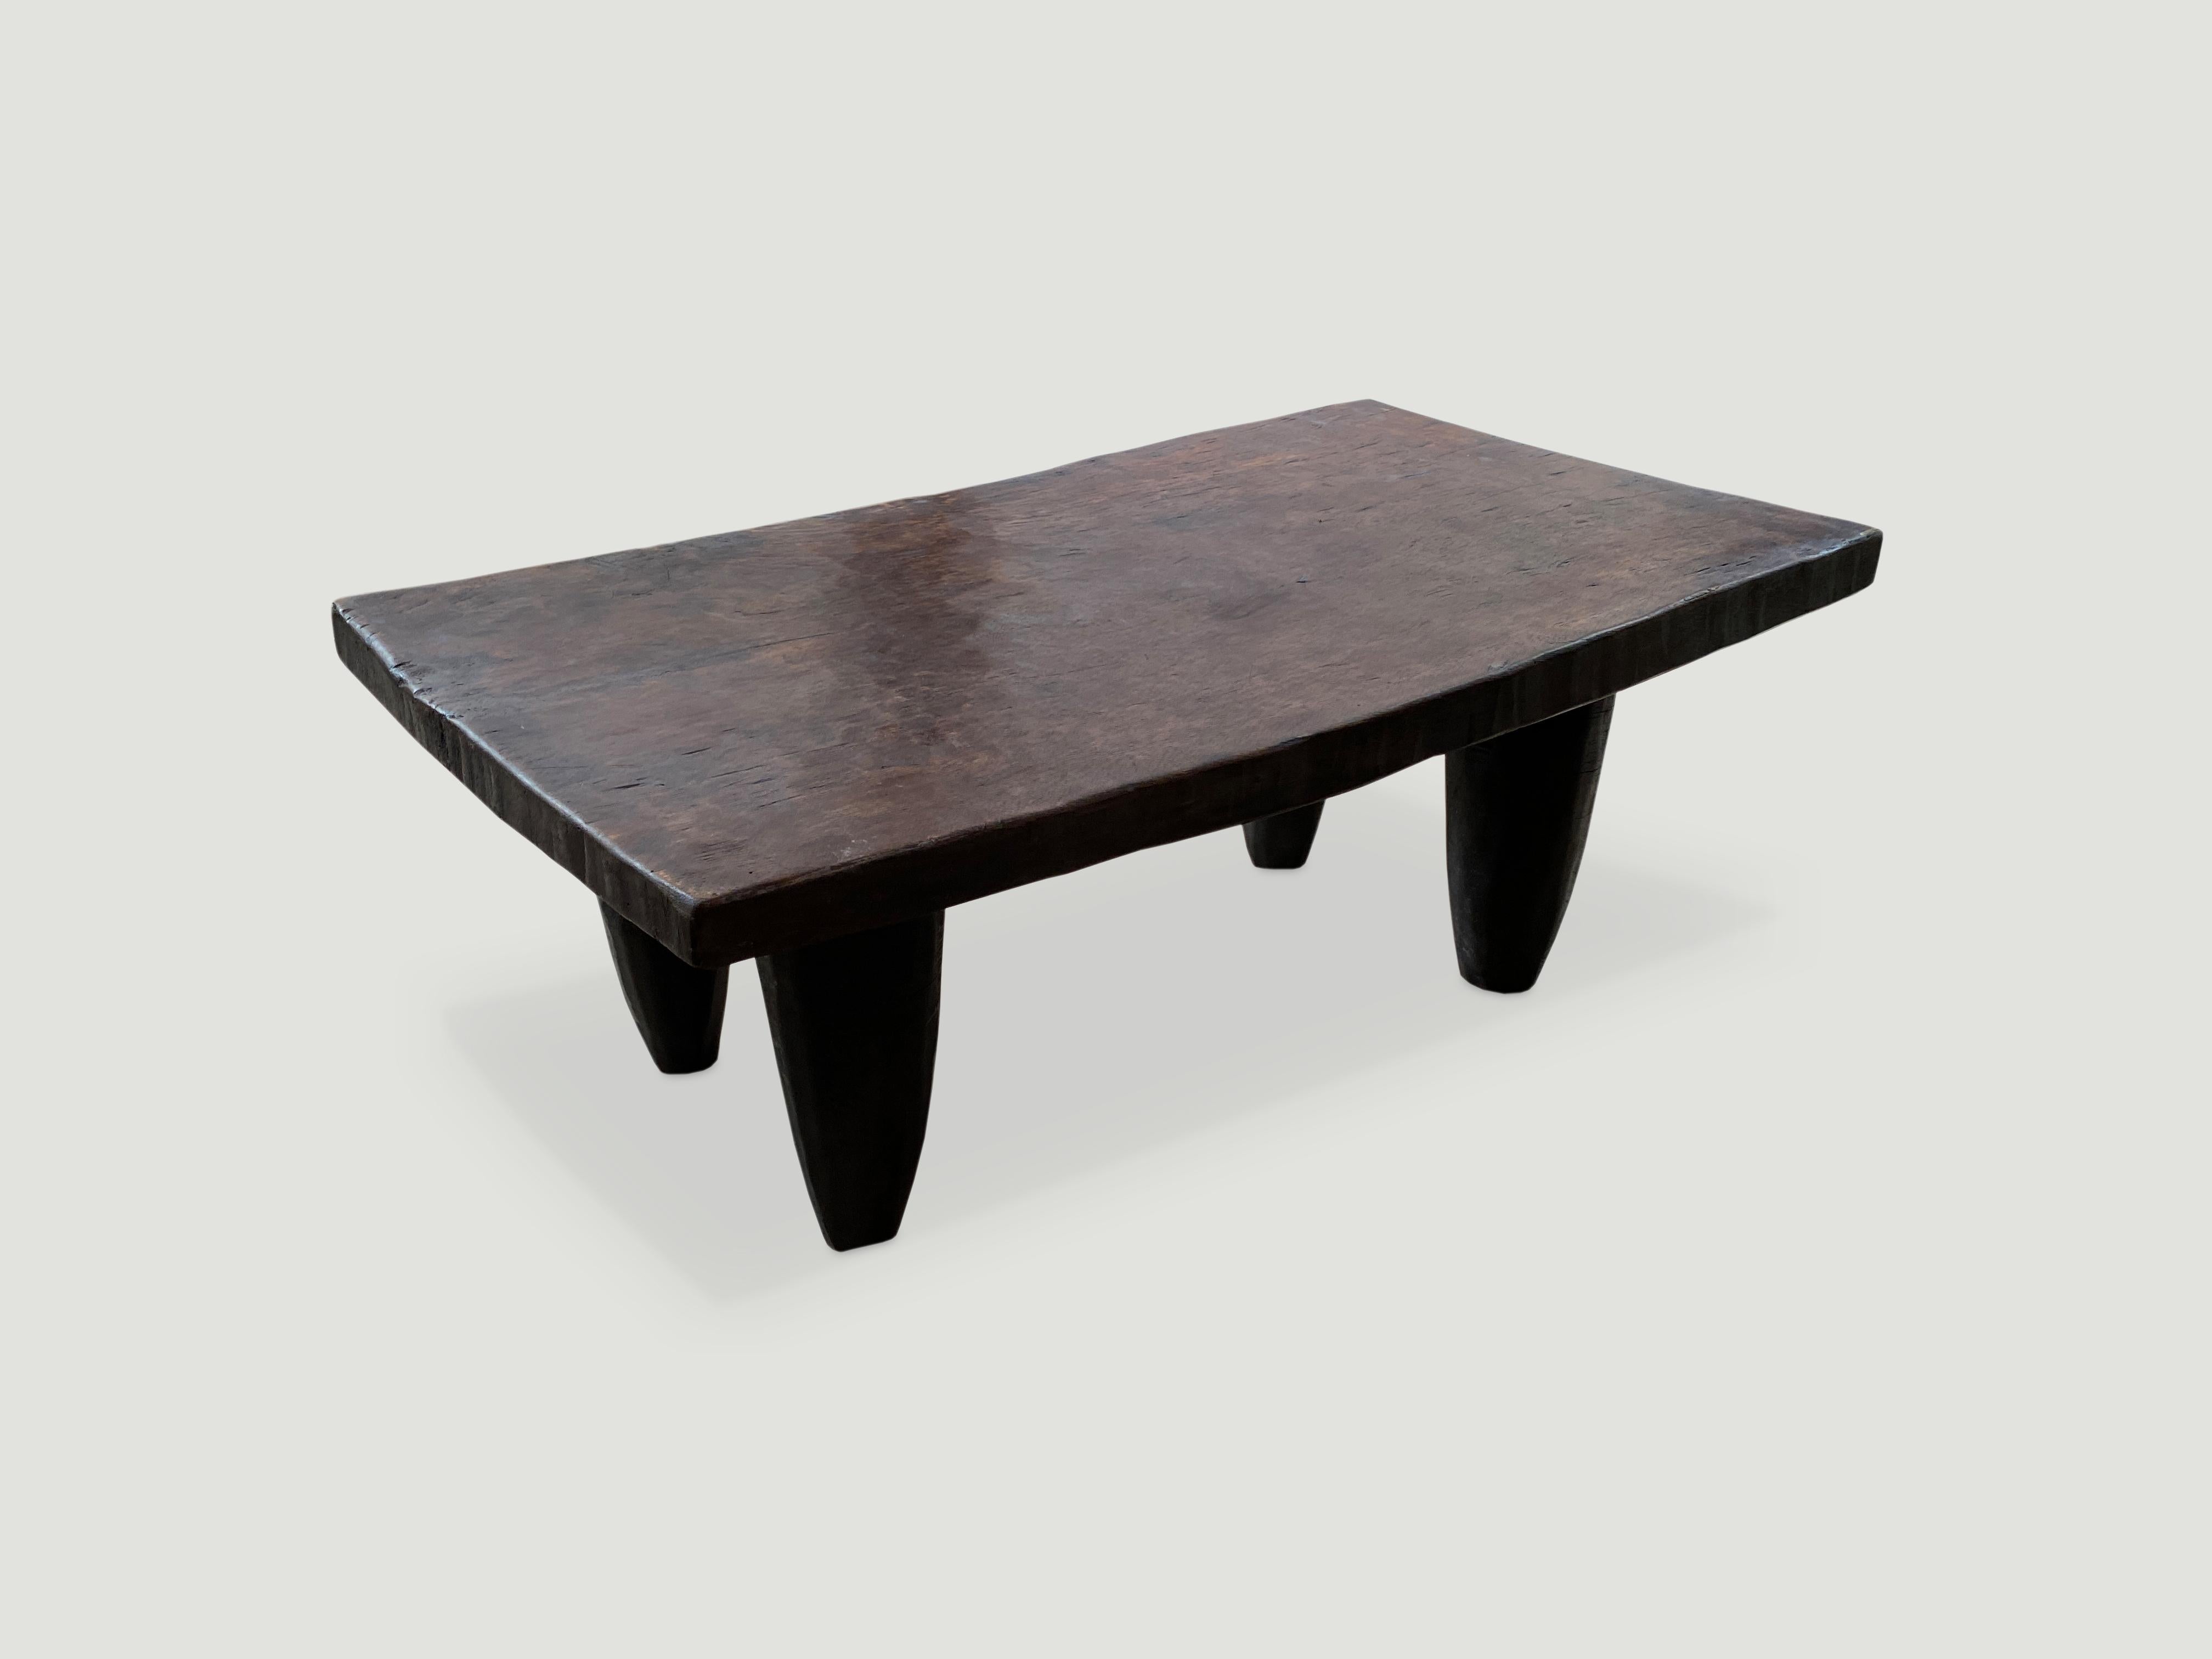 Antique bench or coffee table carved from a single piece of iroko wood, native to the west coast of Africa. The wood is tough, dense and very durable. Shown with cone style legs. 2